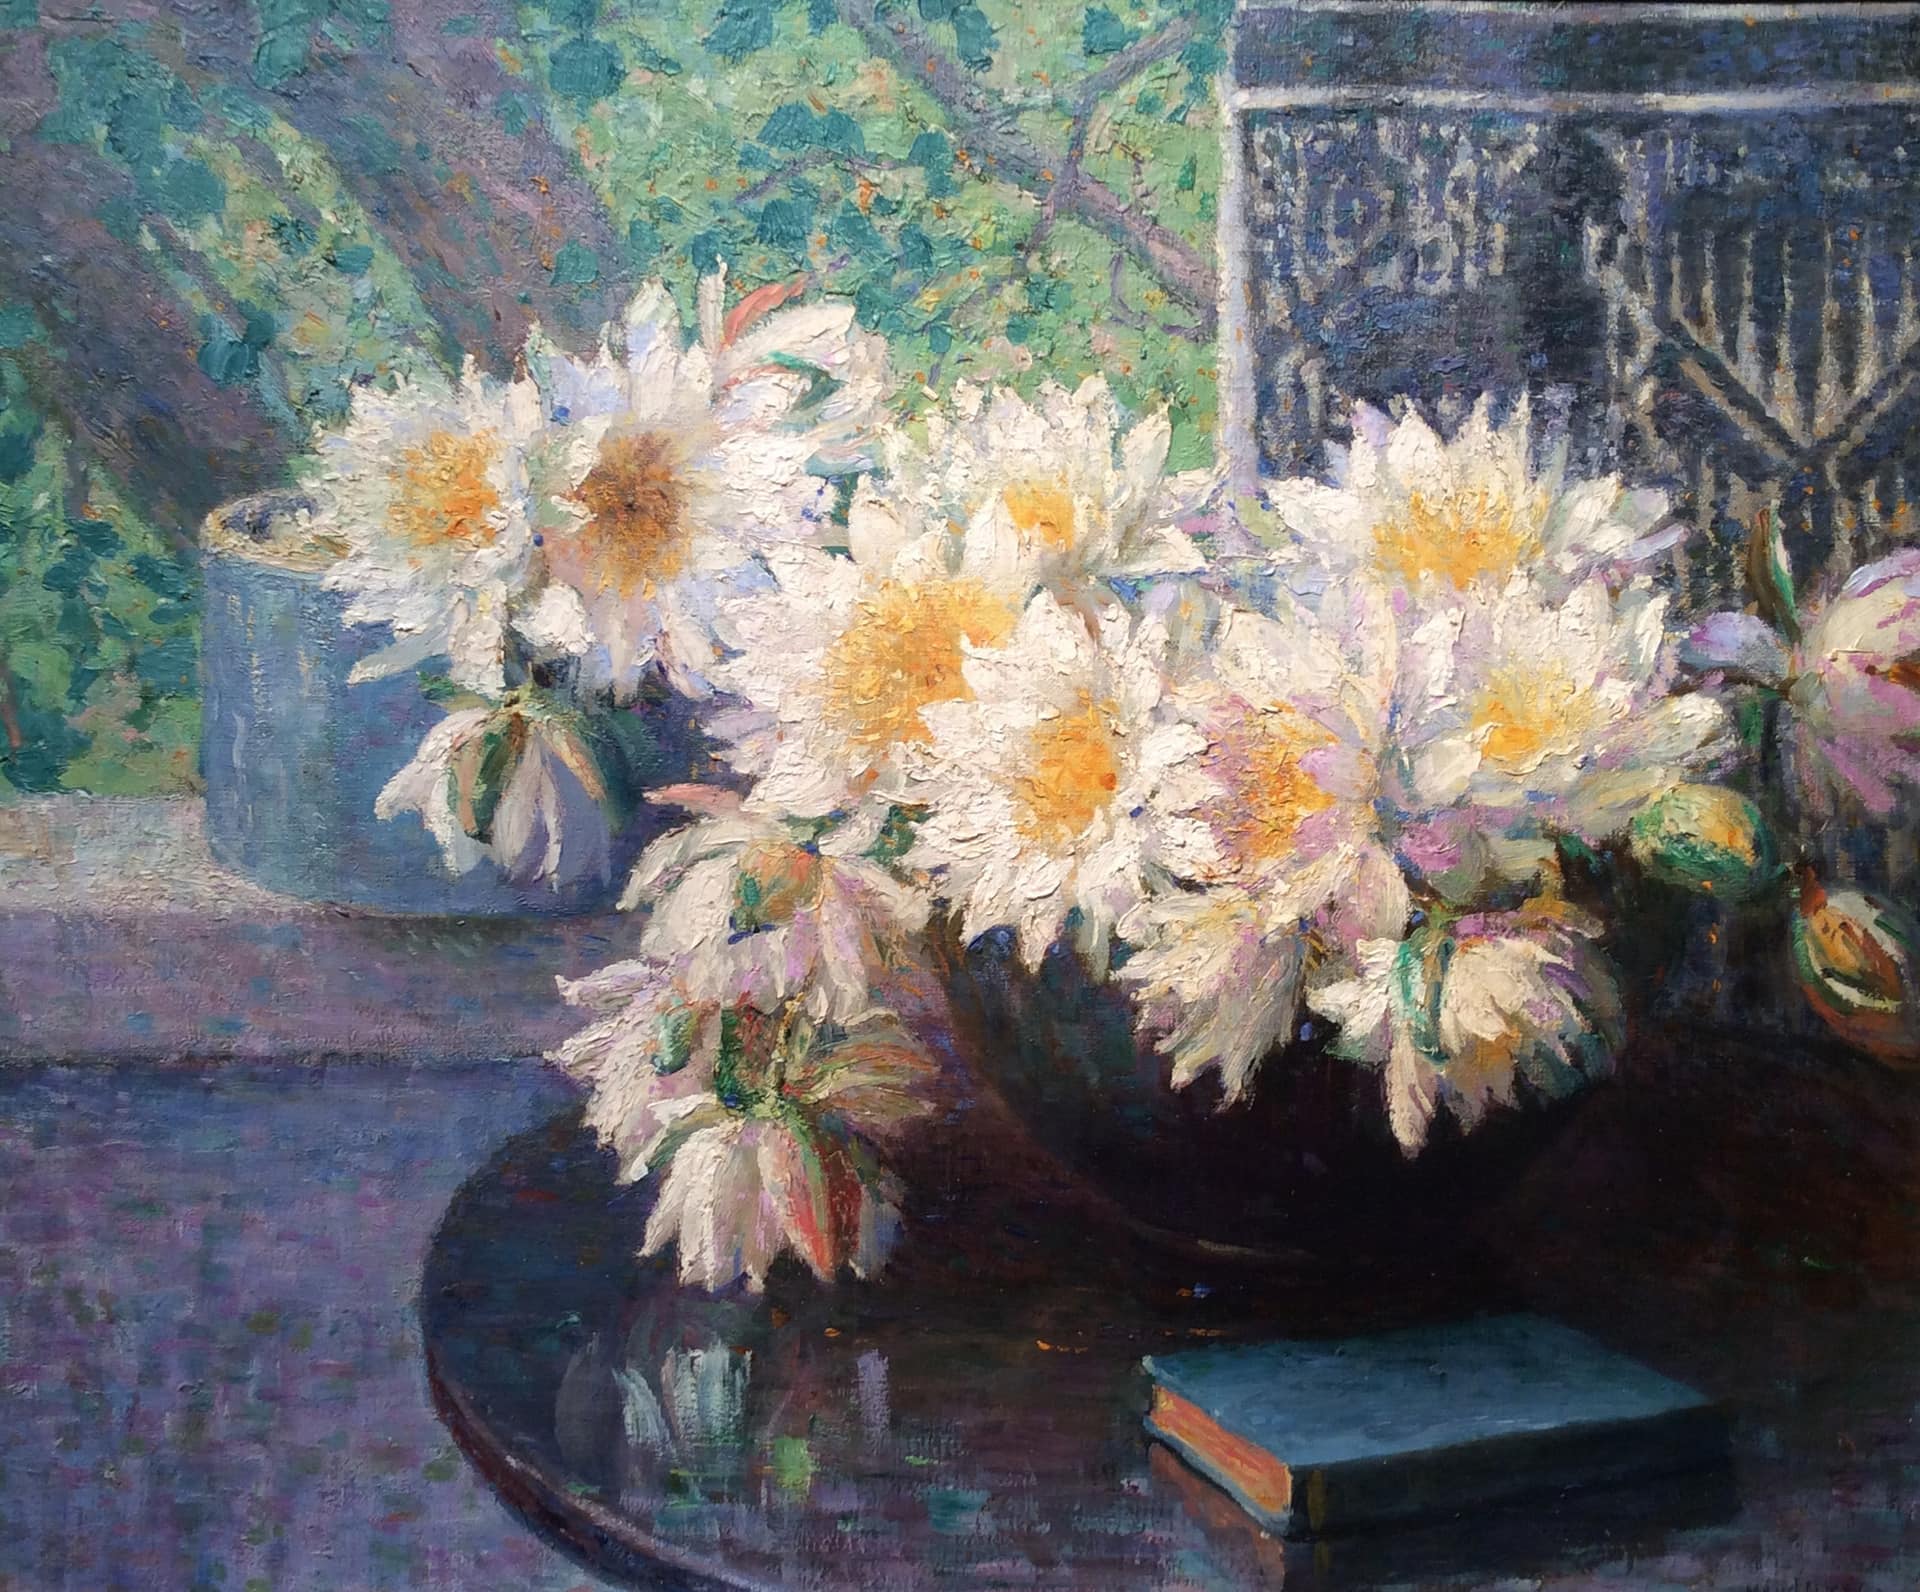 Mason's Still life with Daisies. A vase containing daisies on a table beside a blue book. An open window sits behind.